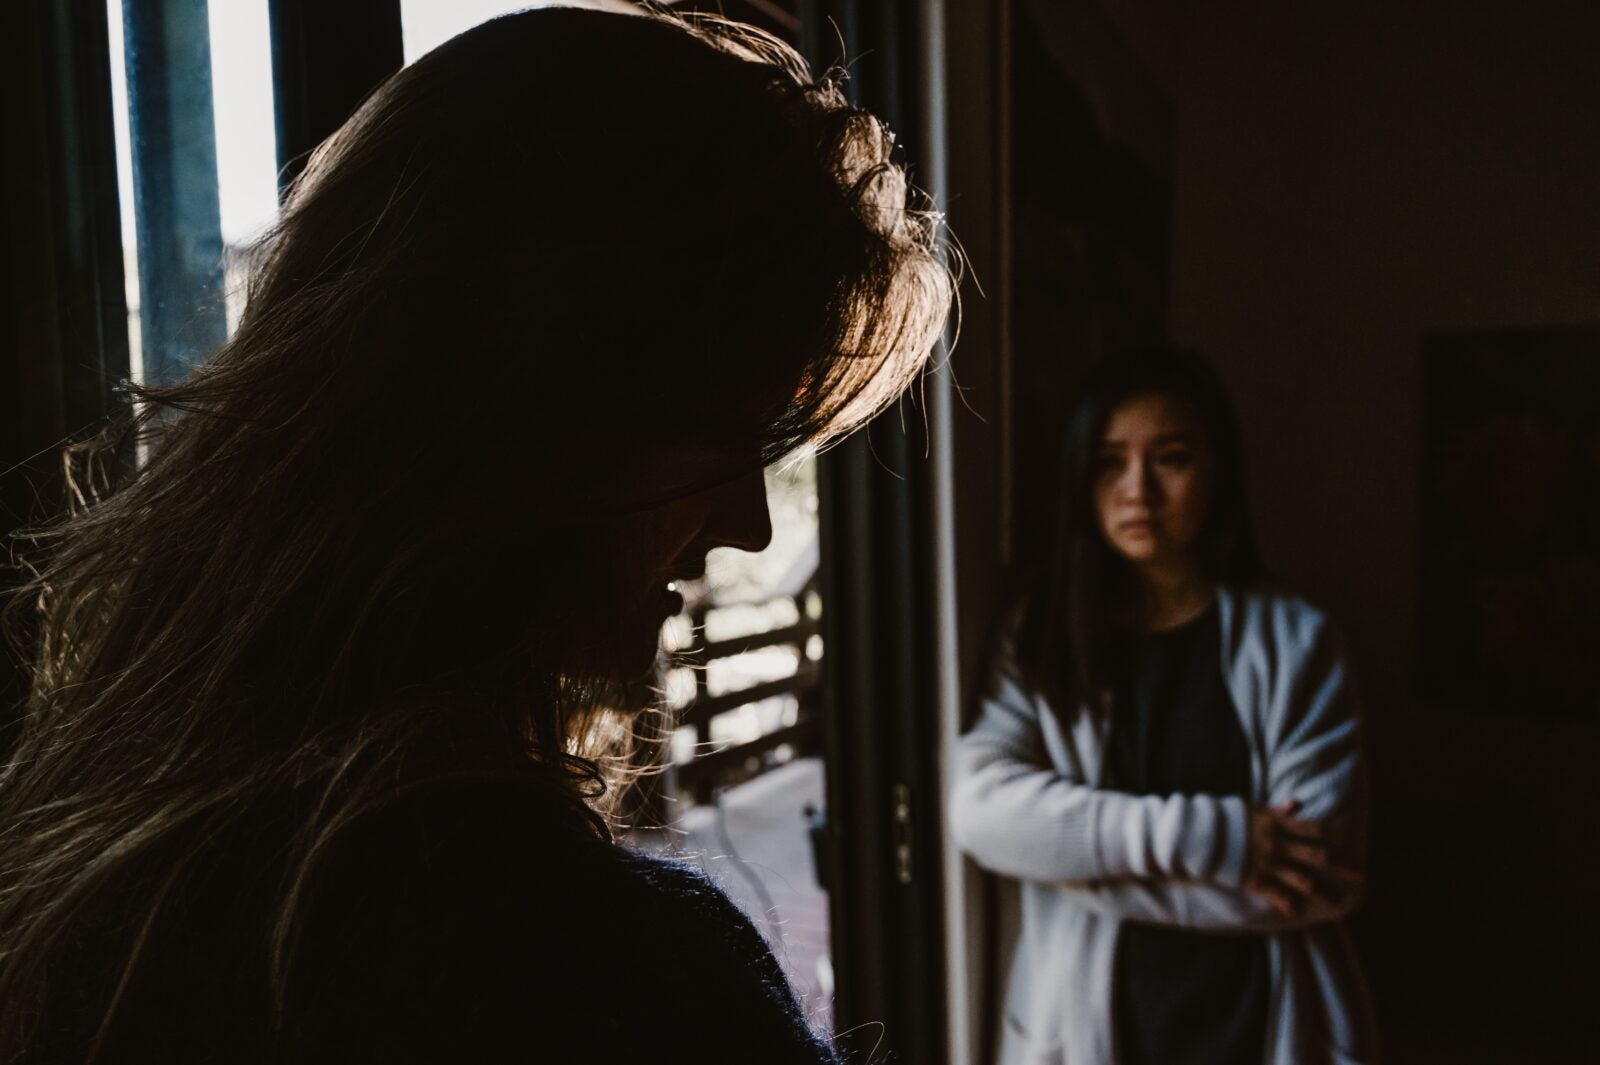 A woman stands by a sliding door and crosses her arms around her chest while looking at someone across from her. The other person is looking down in guilt or shame.